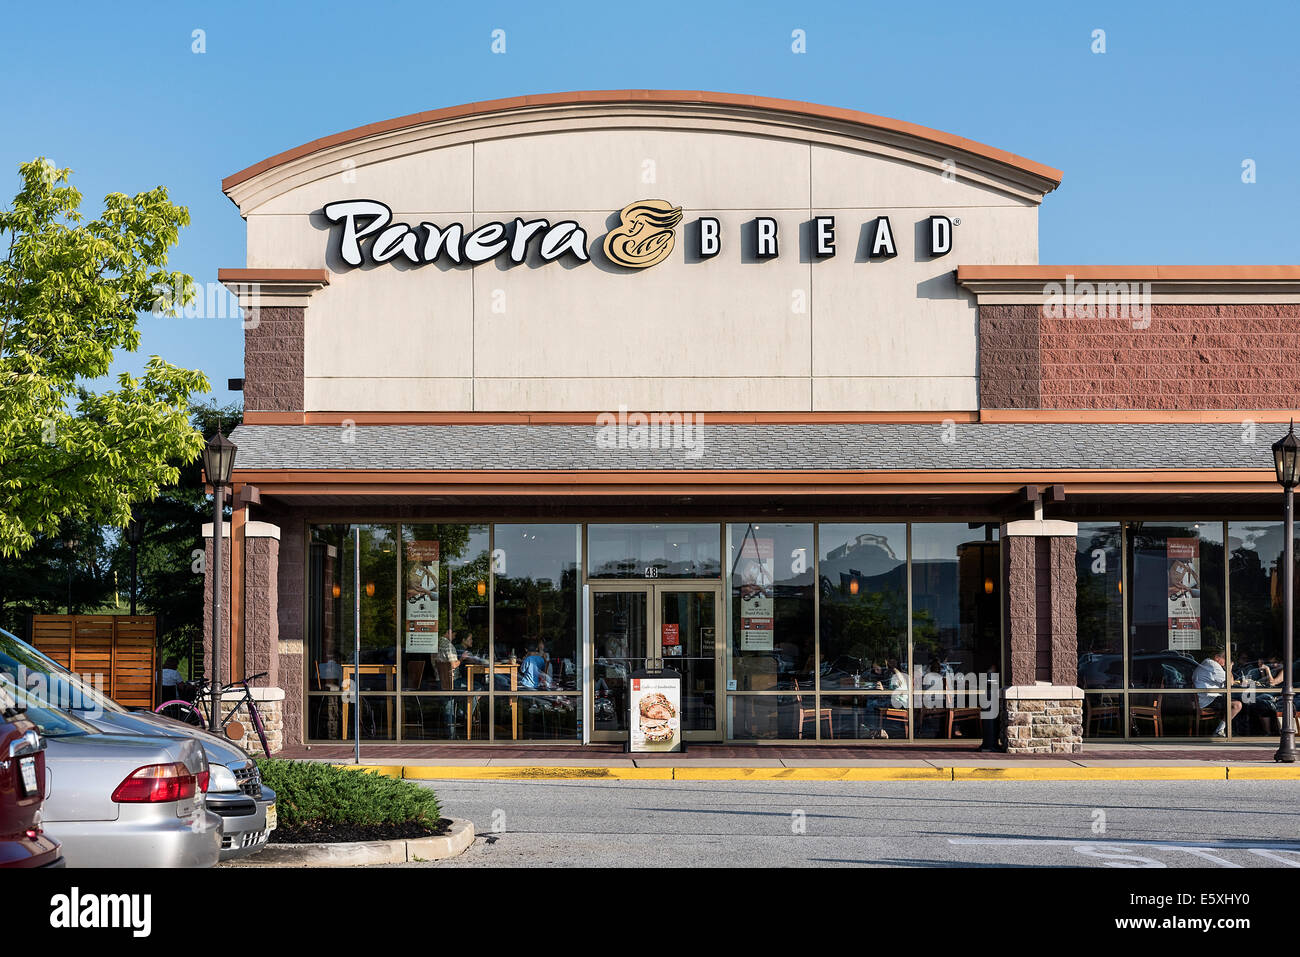 Panera Bread cafe restaurant, Mount Laural, New Jersey, USA Stock Photo